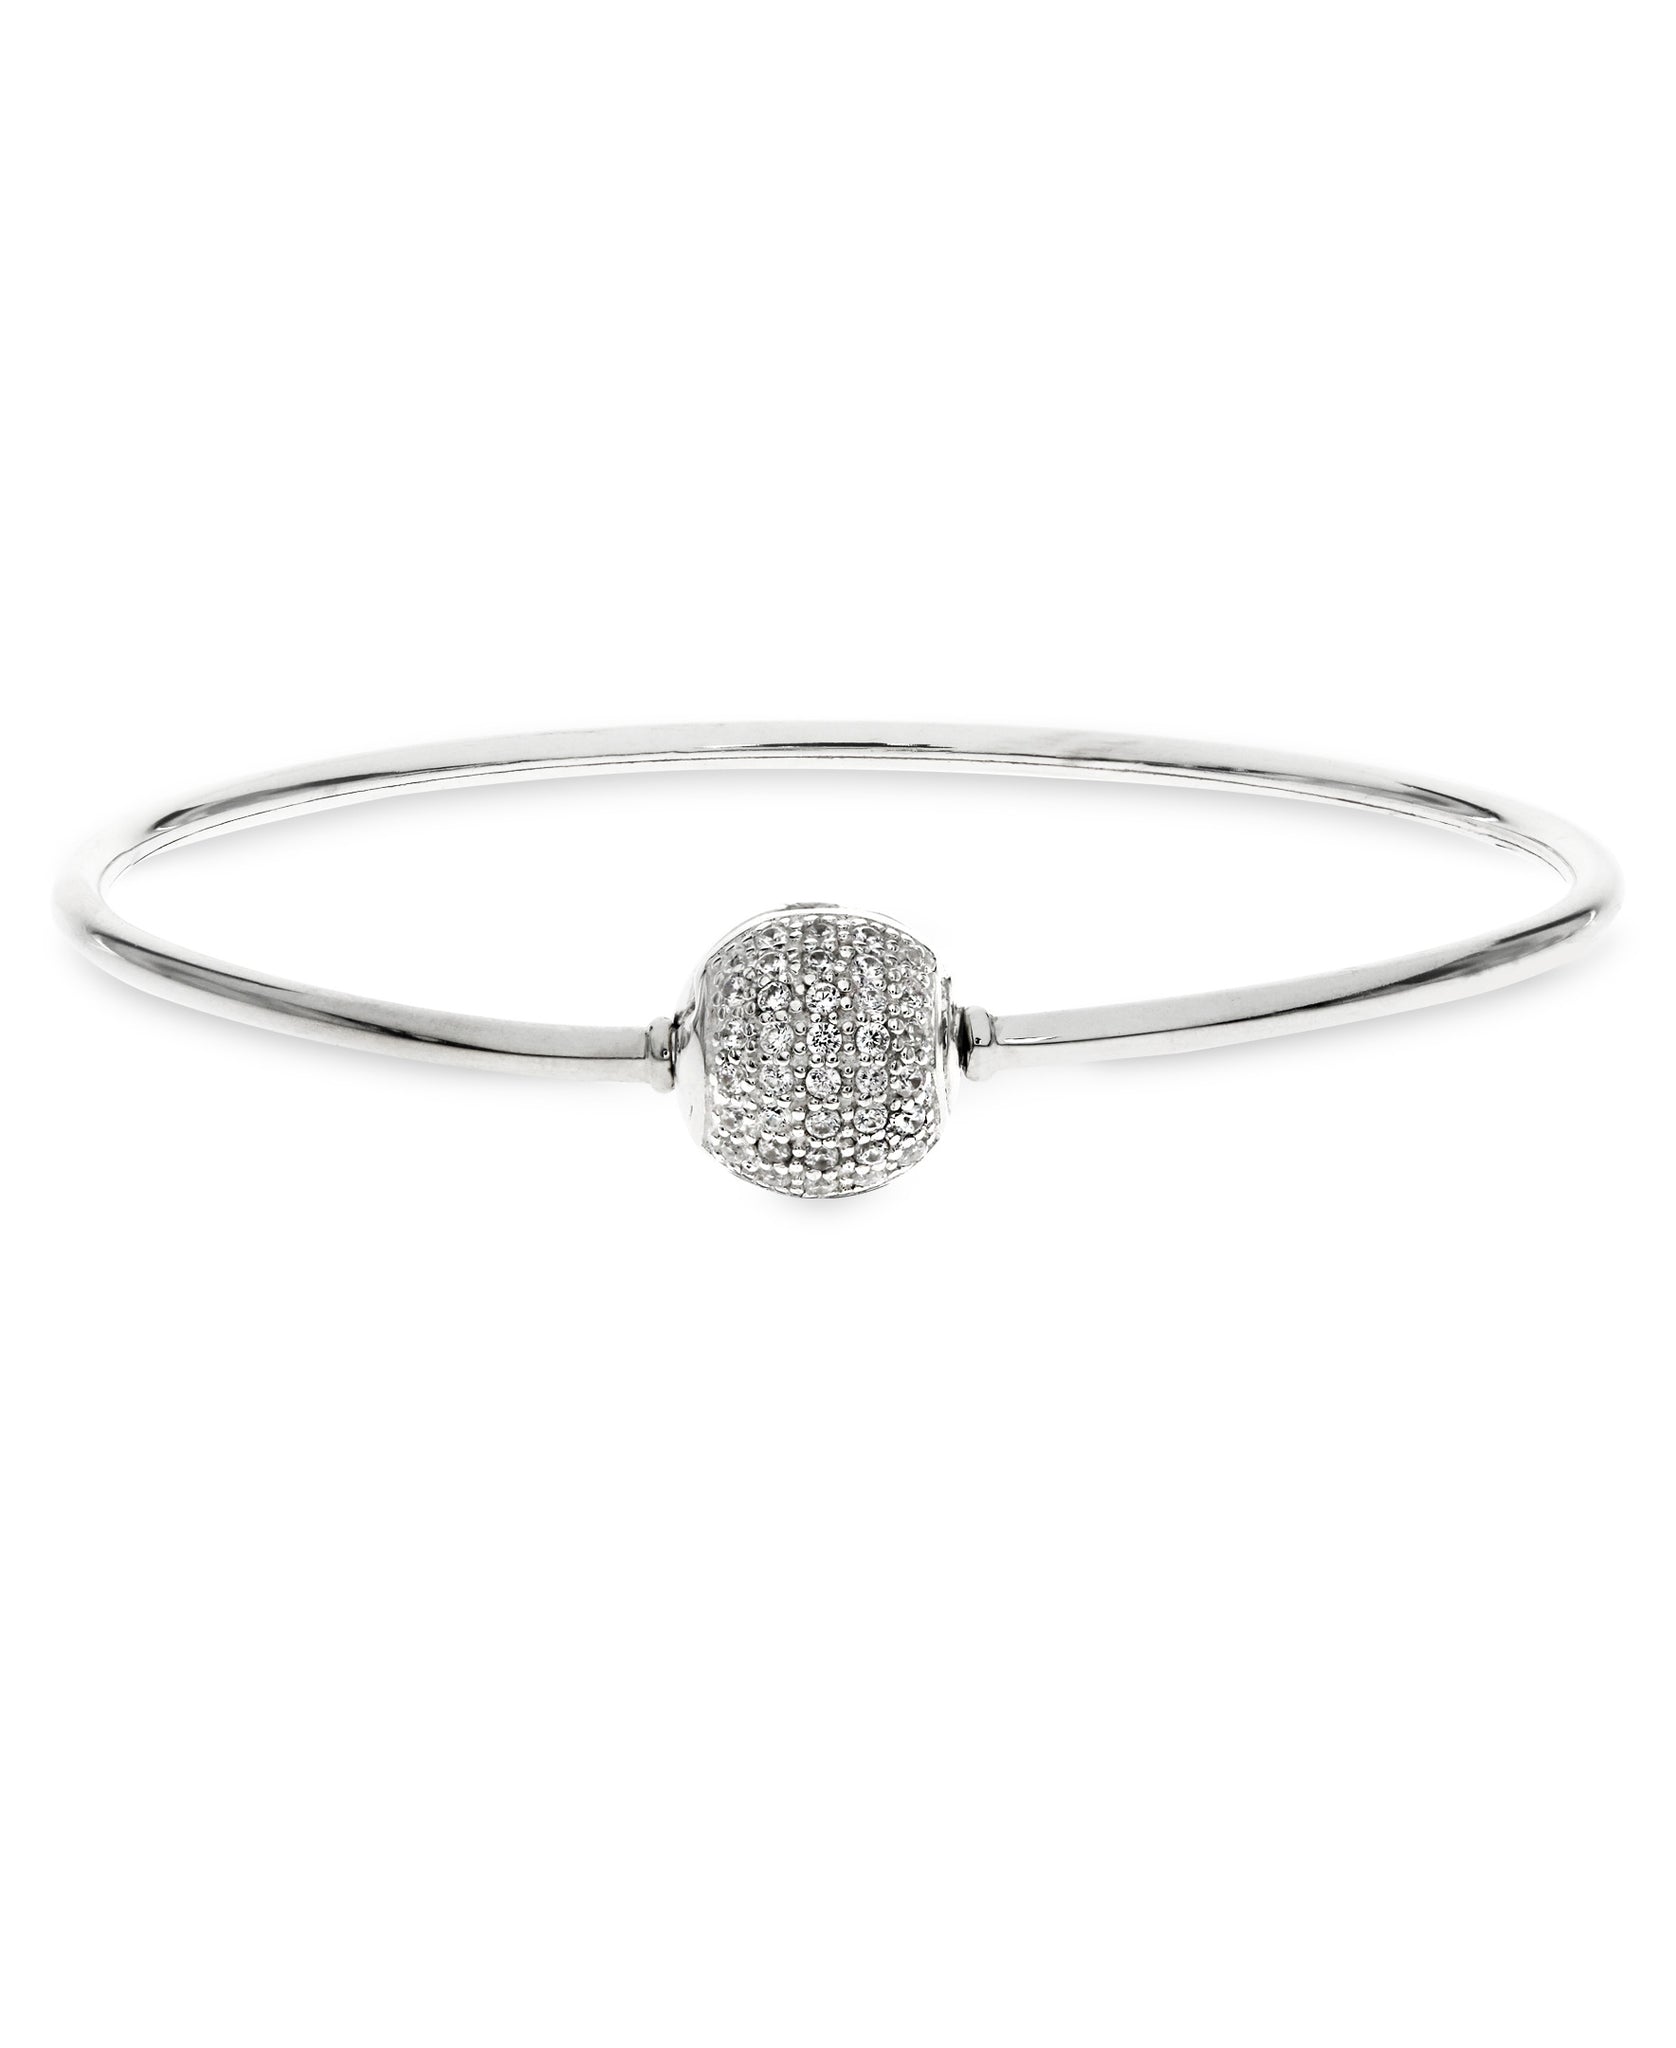 Children's Sterling Silver Charm Carrier Bangle with Pavé Clasp - Rhona Sutton Jewellery